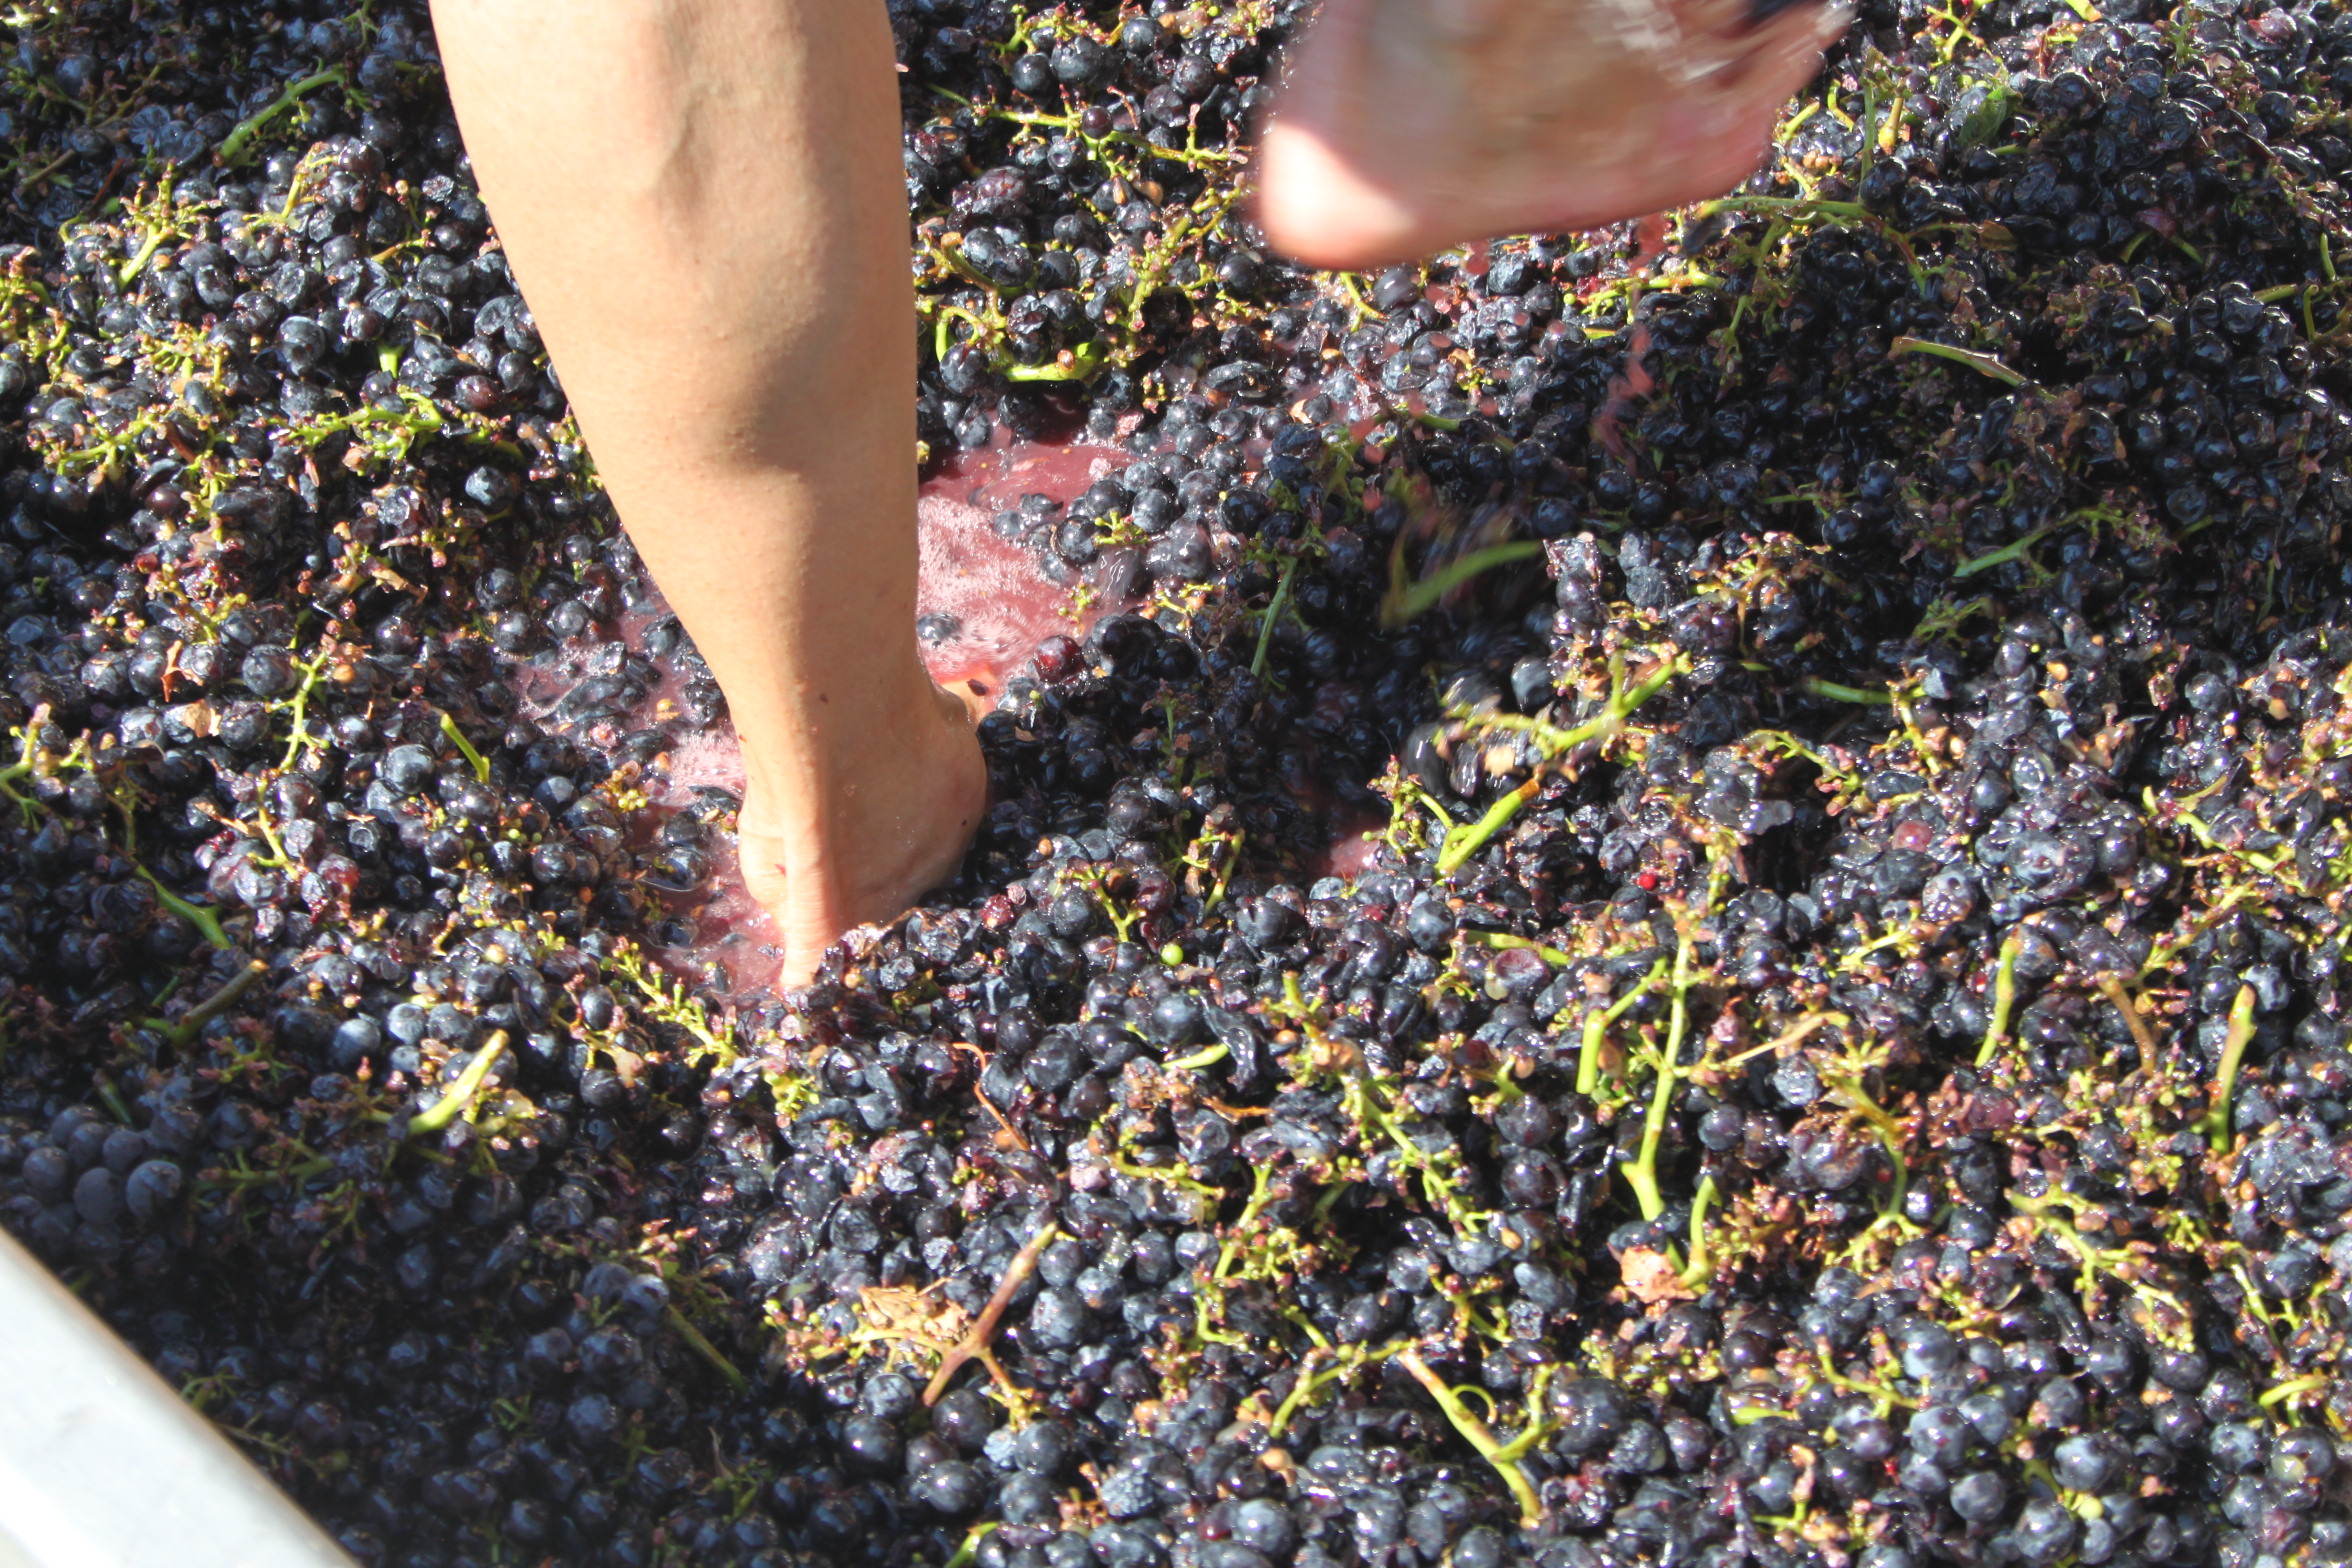 grape harvest and stomping tour in spain